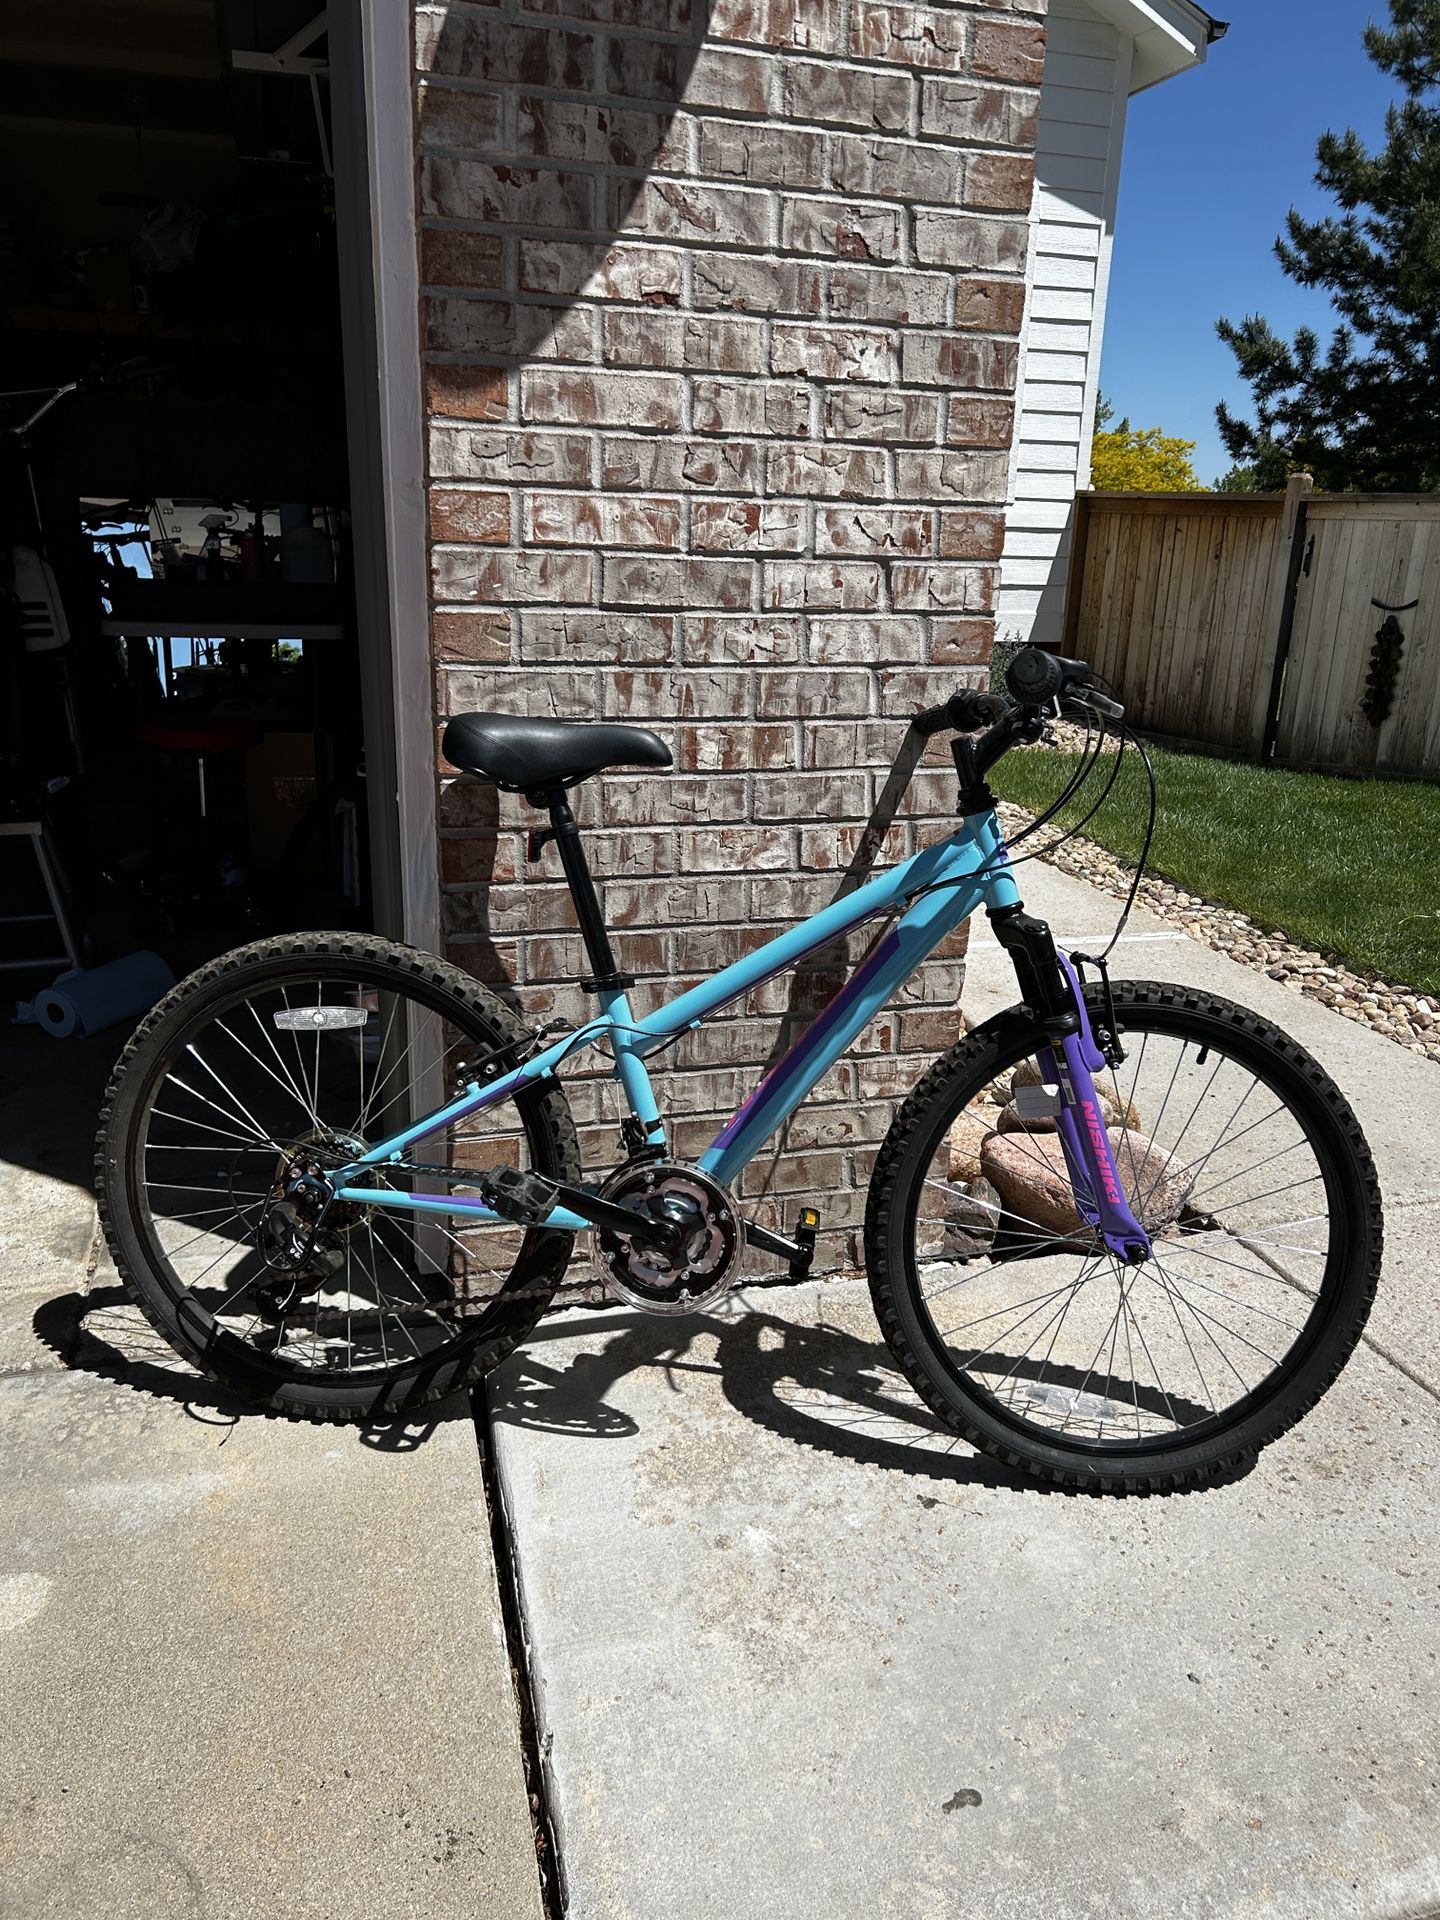 Youth Bike For Sale!